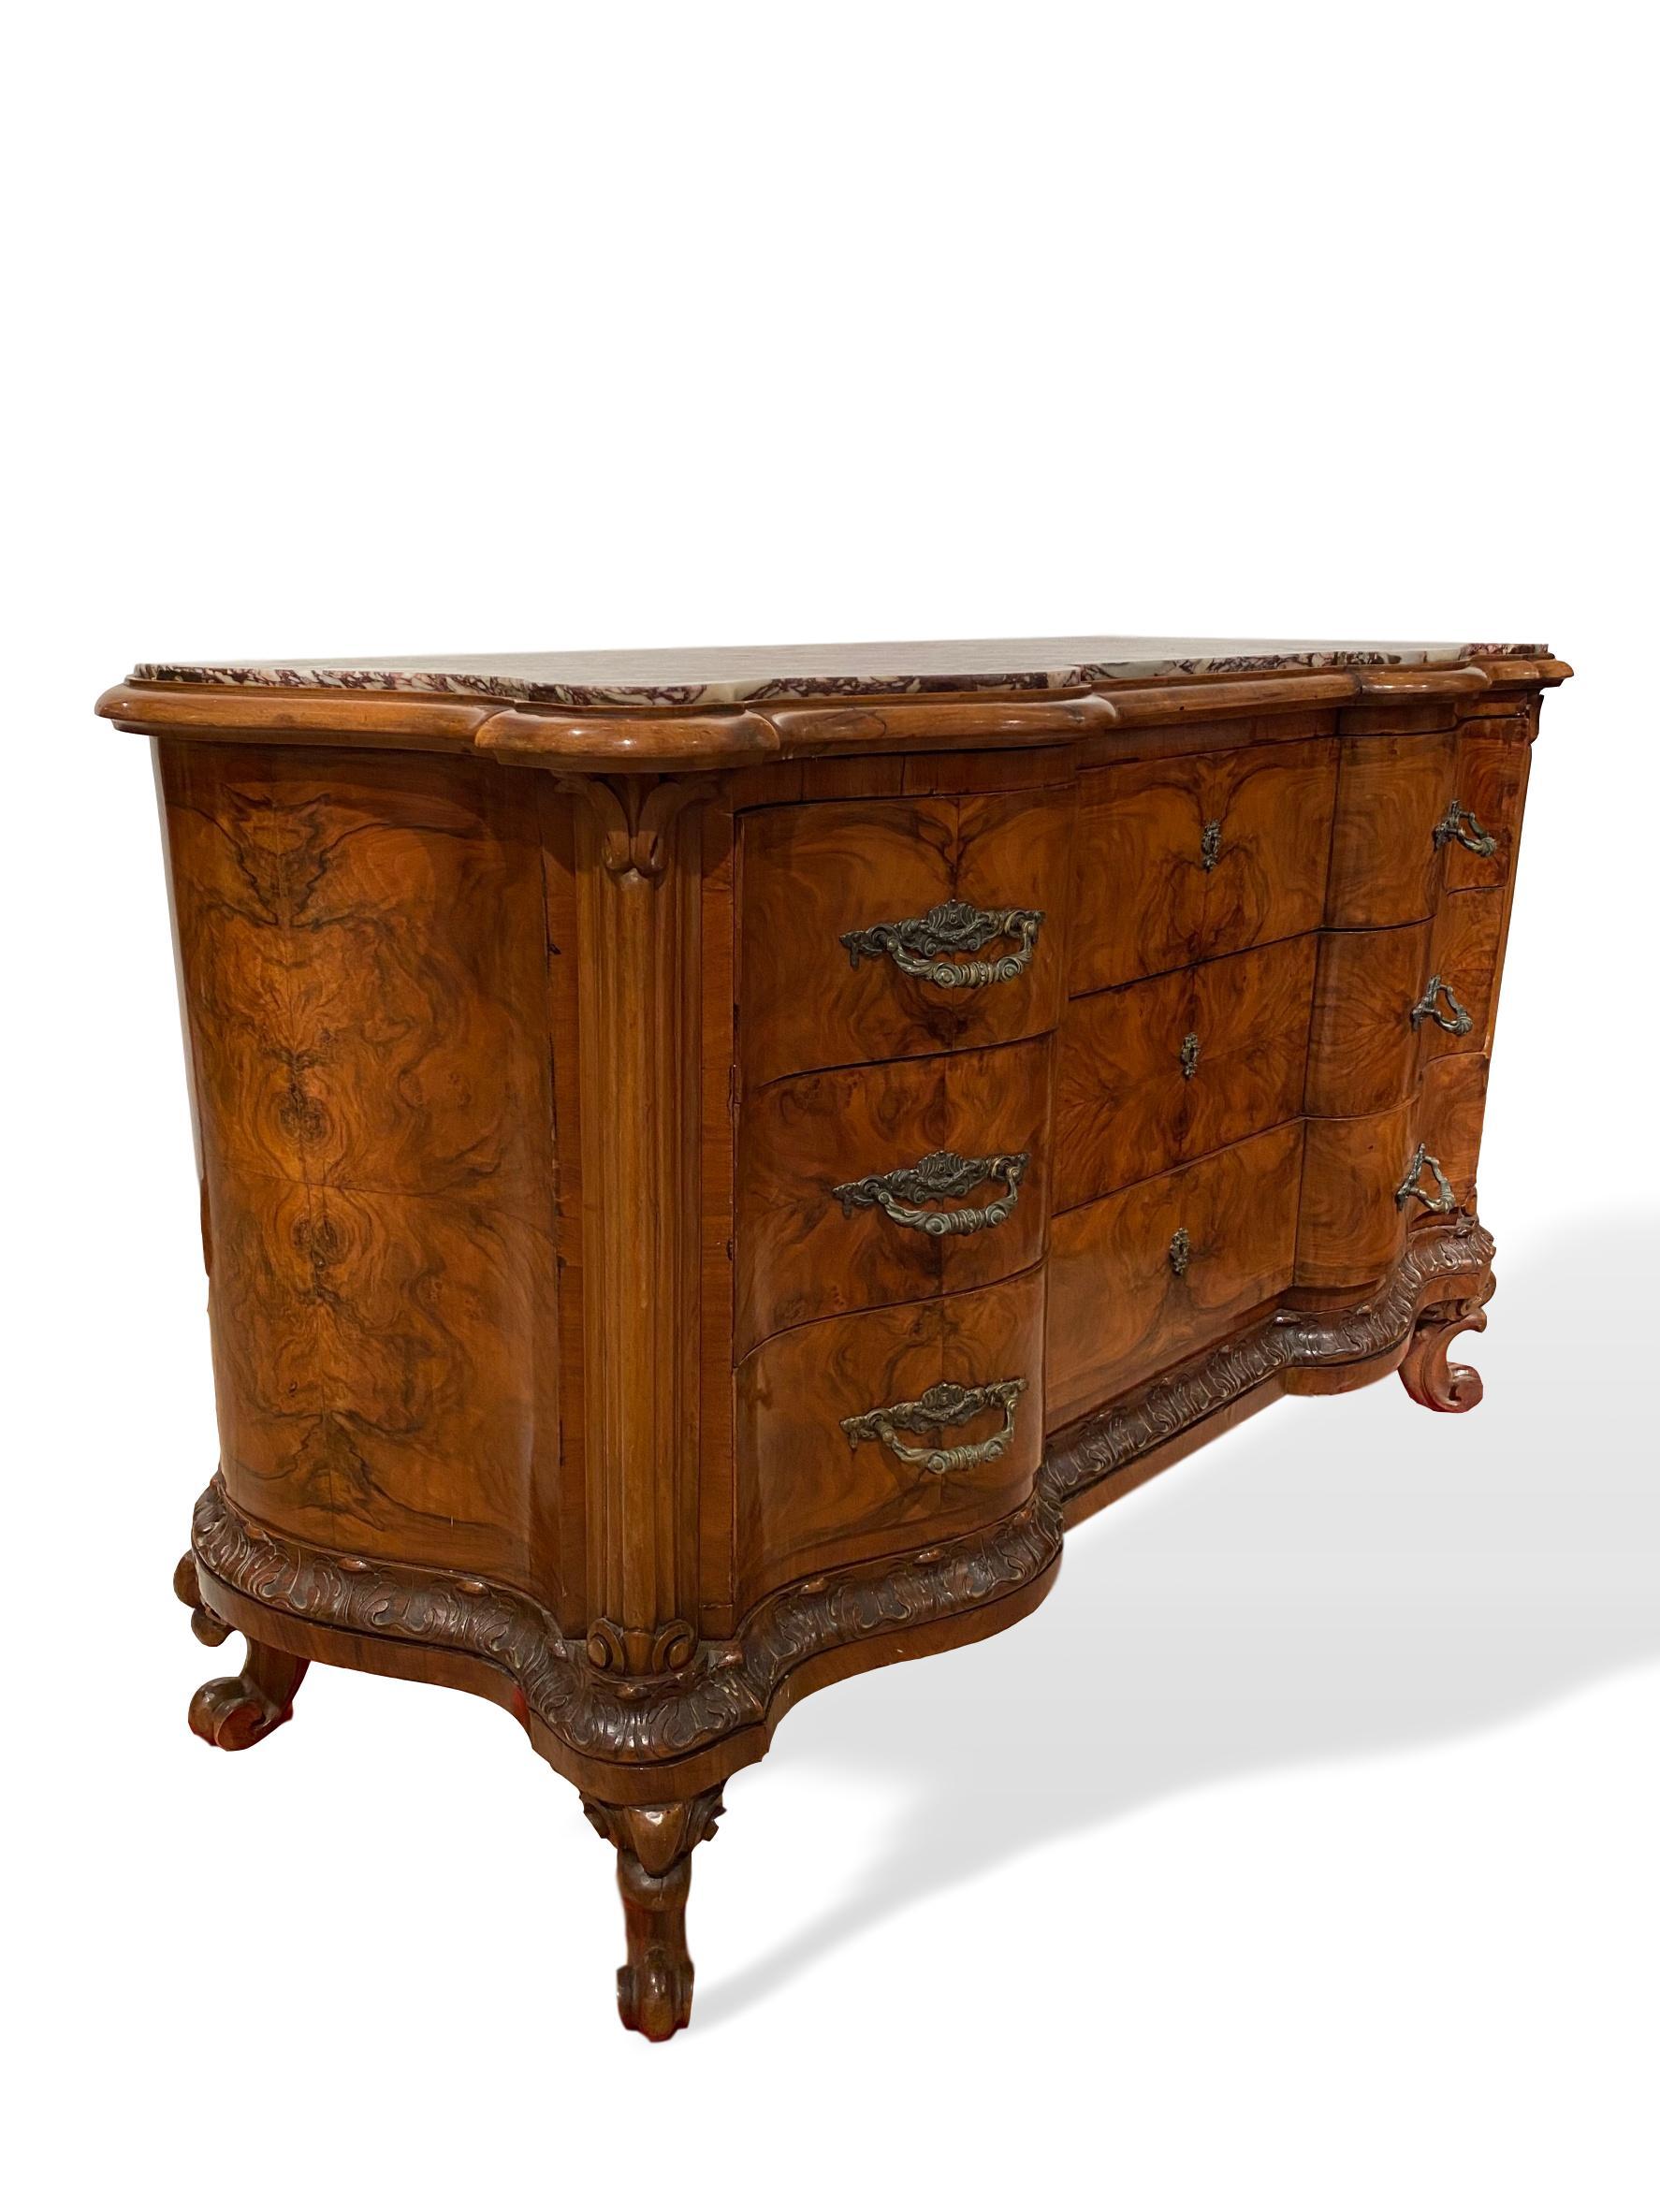 Hand-Carved Walnut Marble-Top Serpentine Commode, Italian, circa 1880